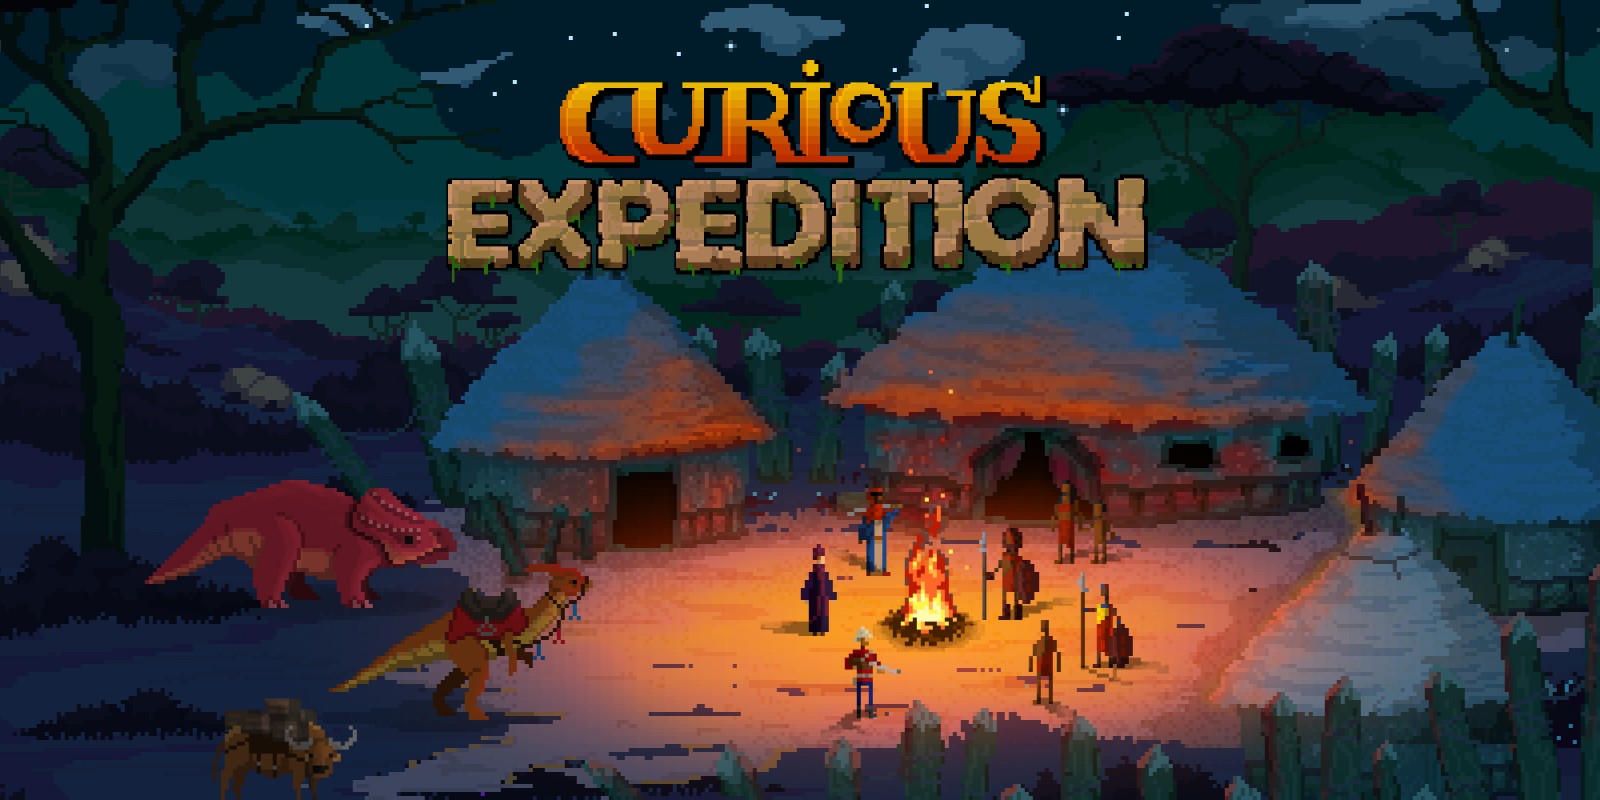 download Curious Expedition